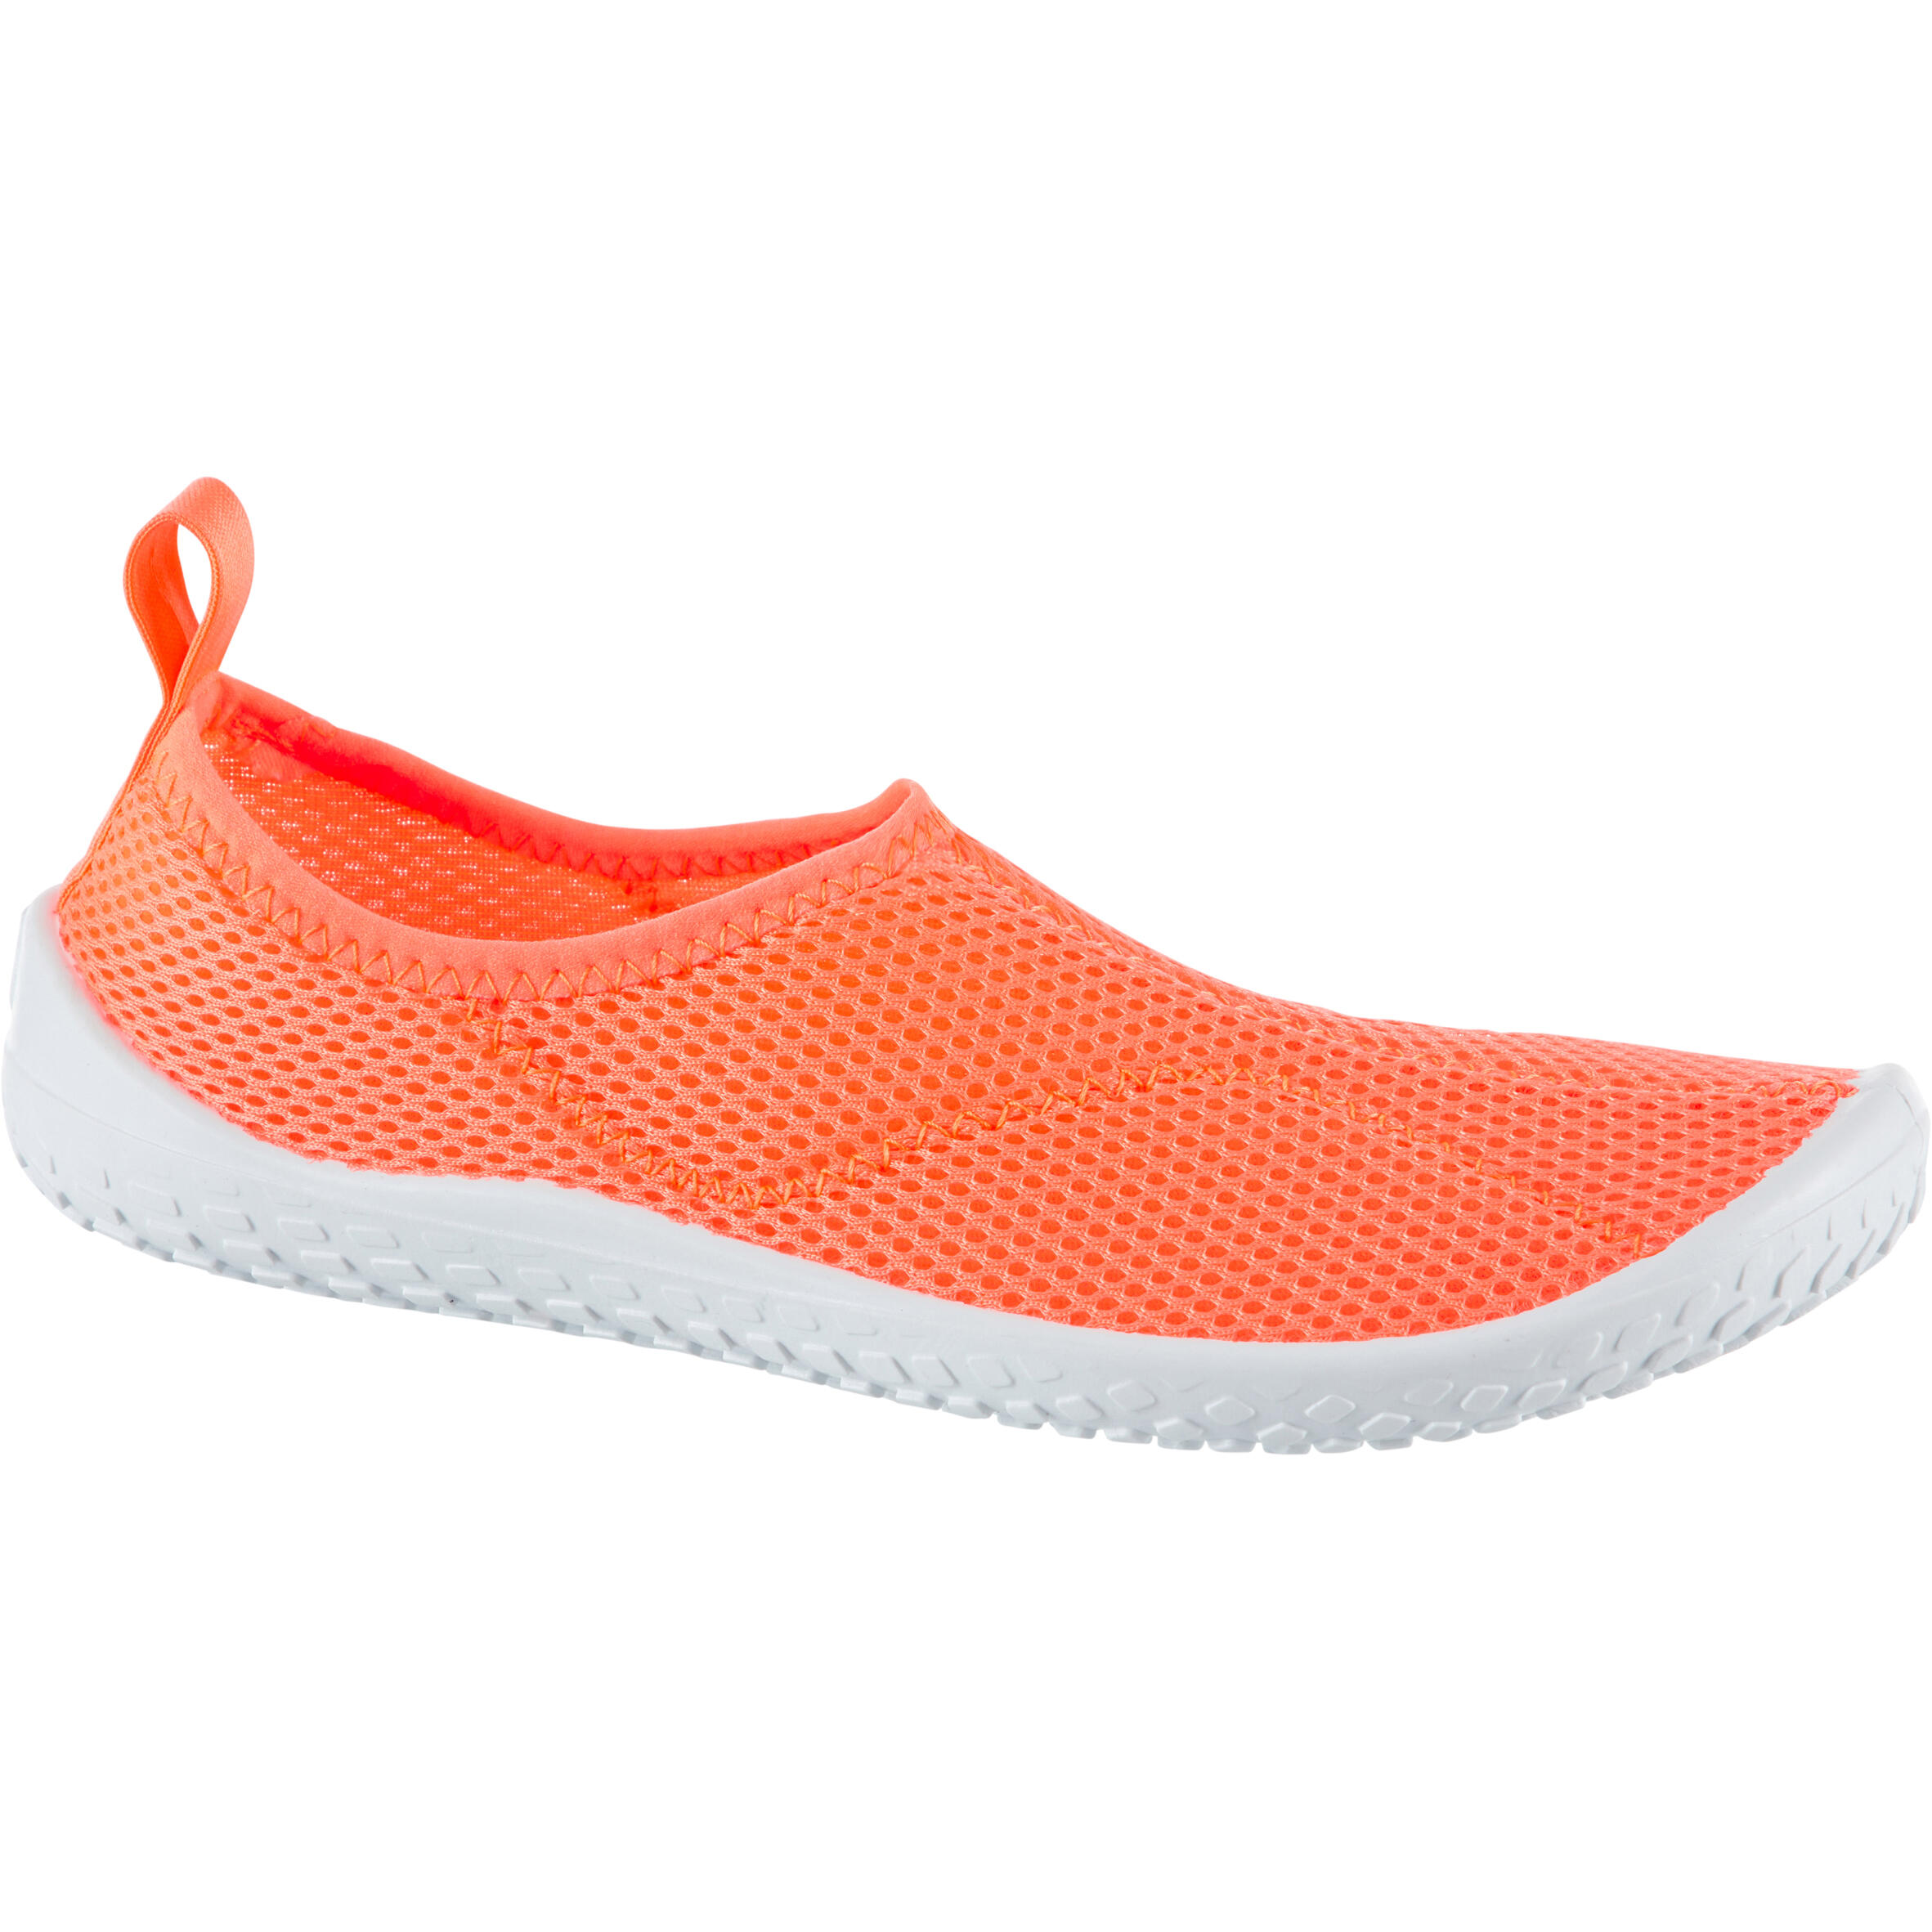 coral water shoes